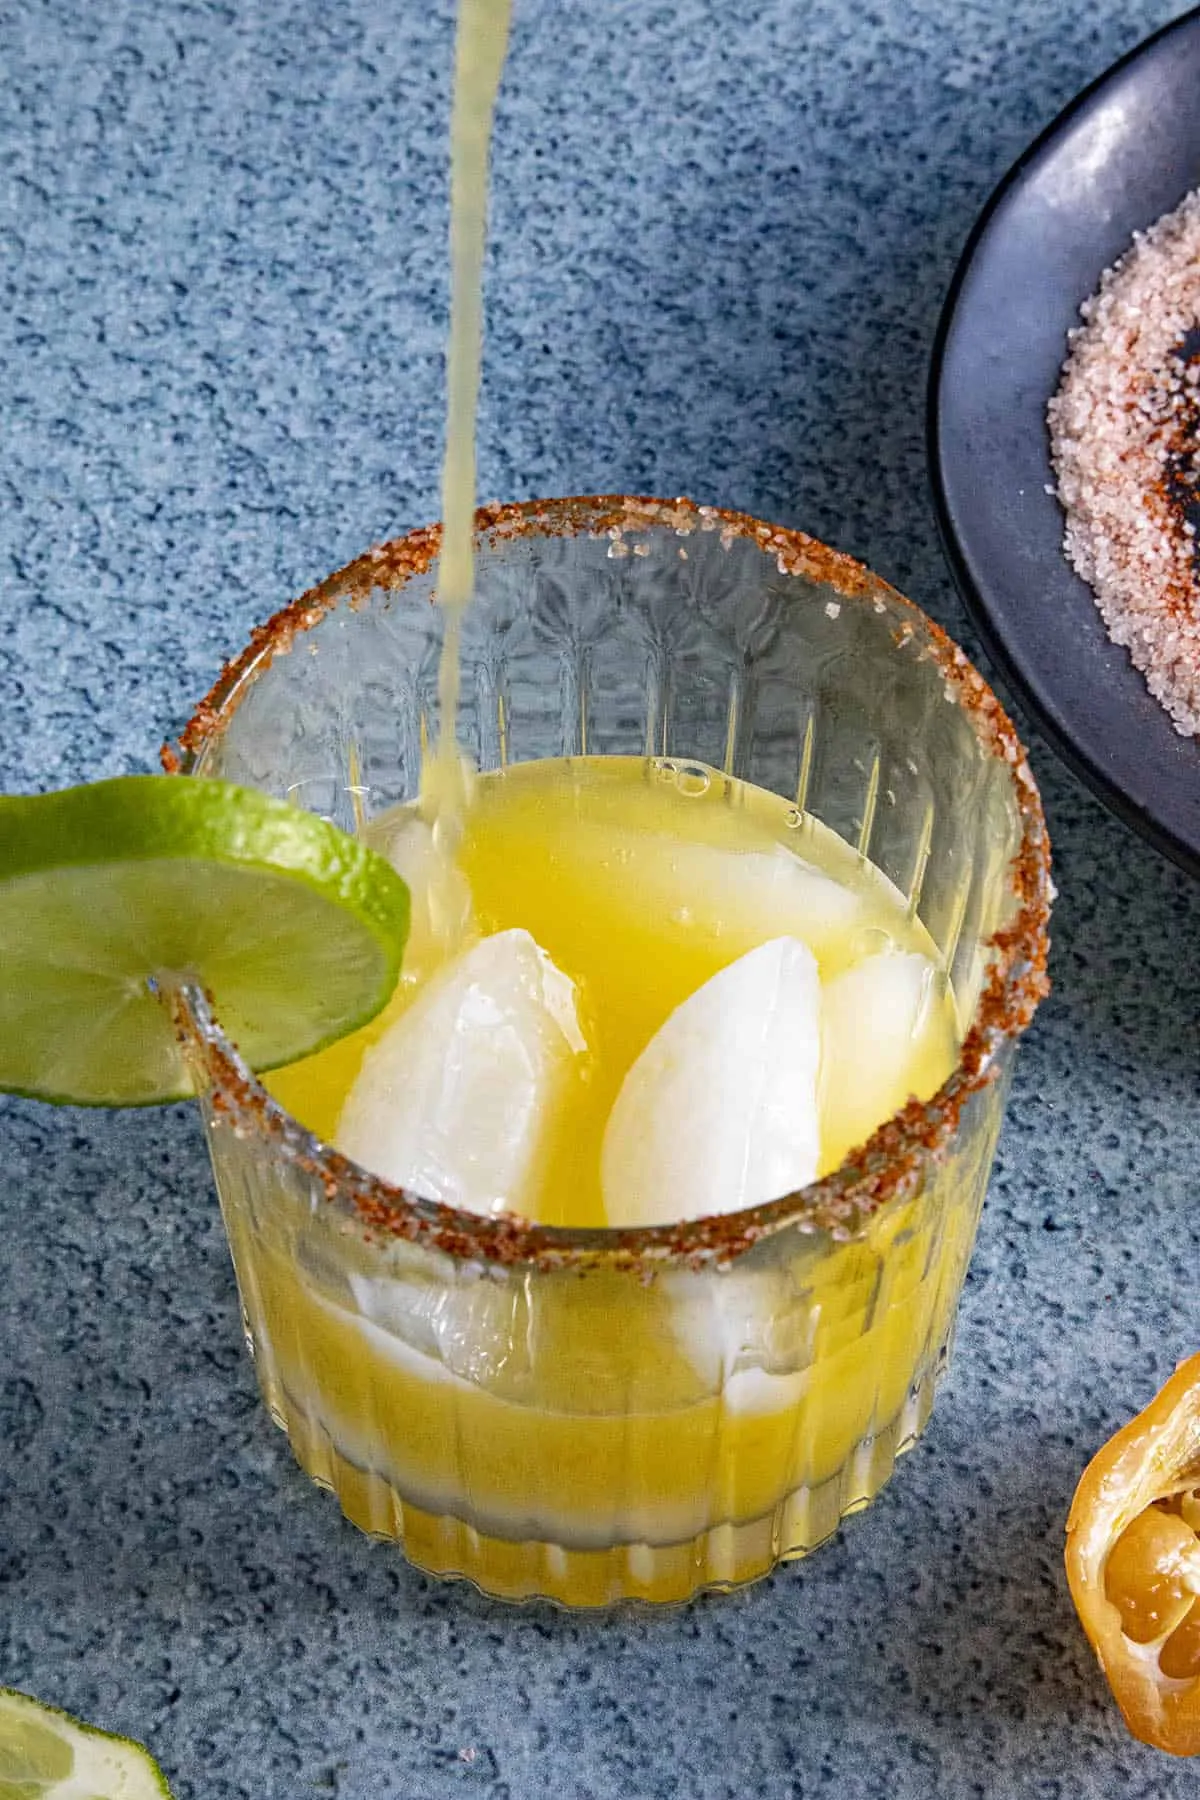 Pouring some Spicy Mango Margarita into a glass with ice.